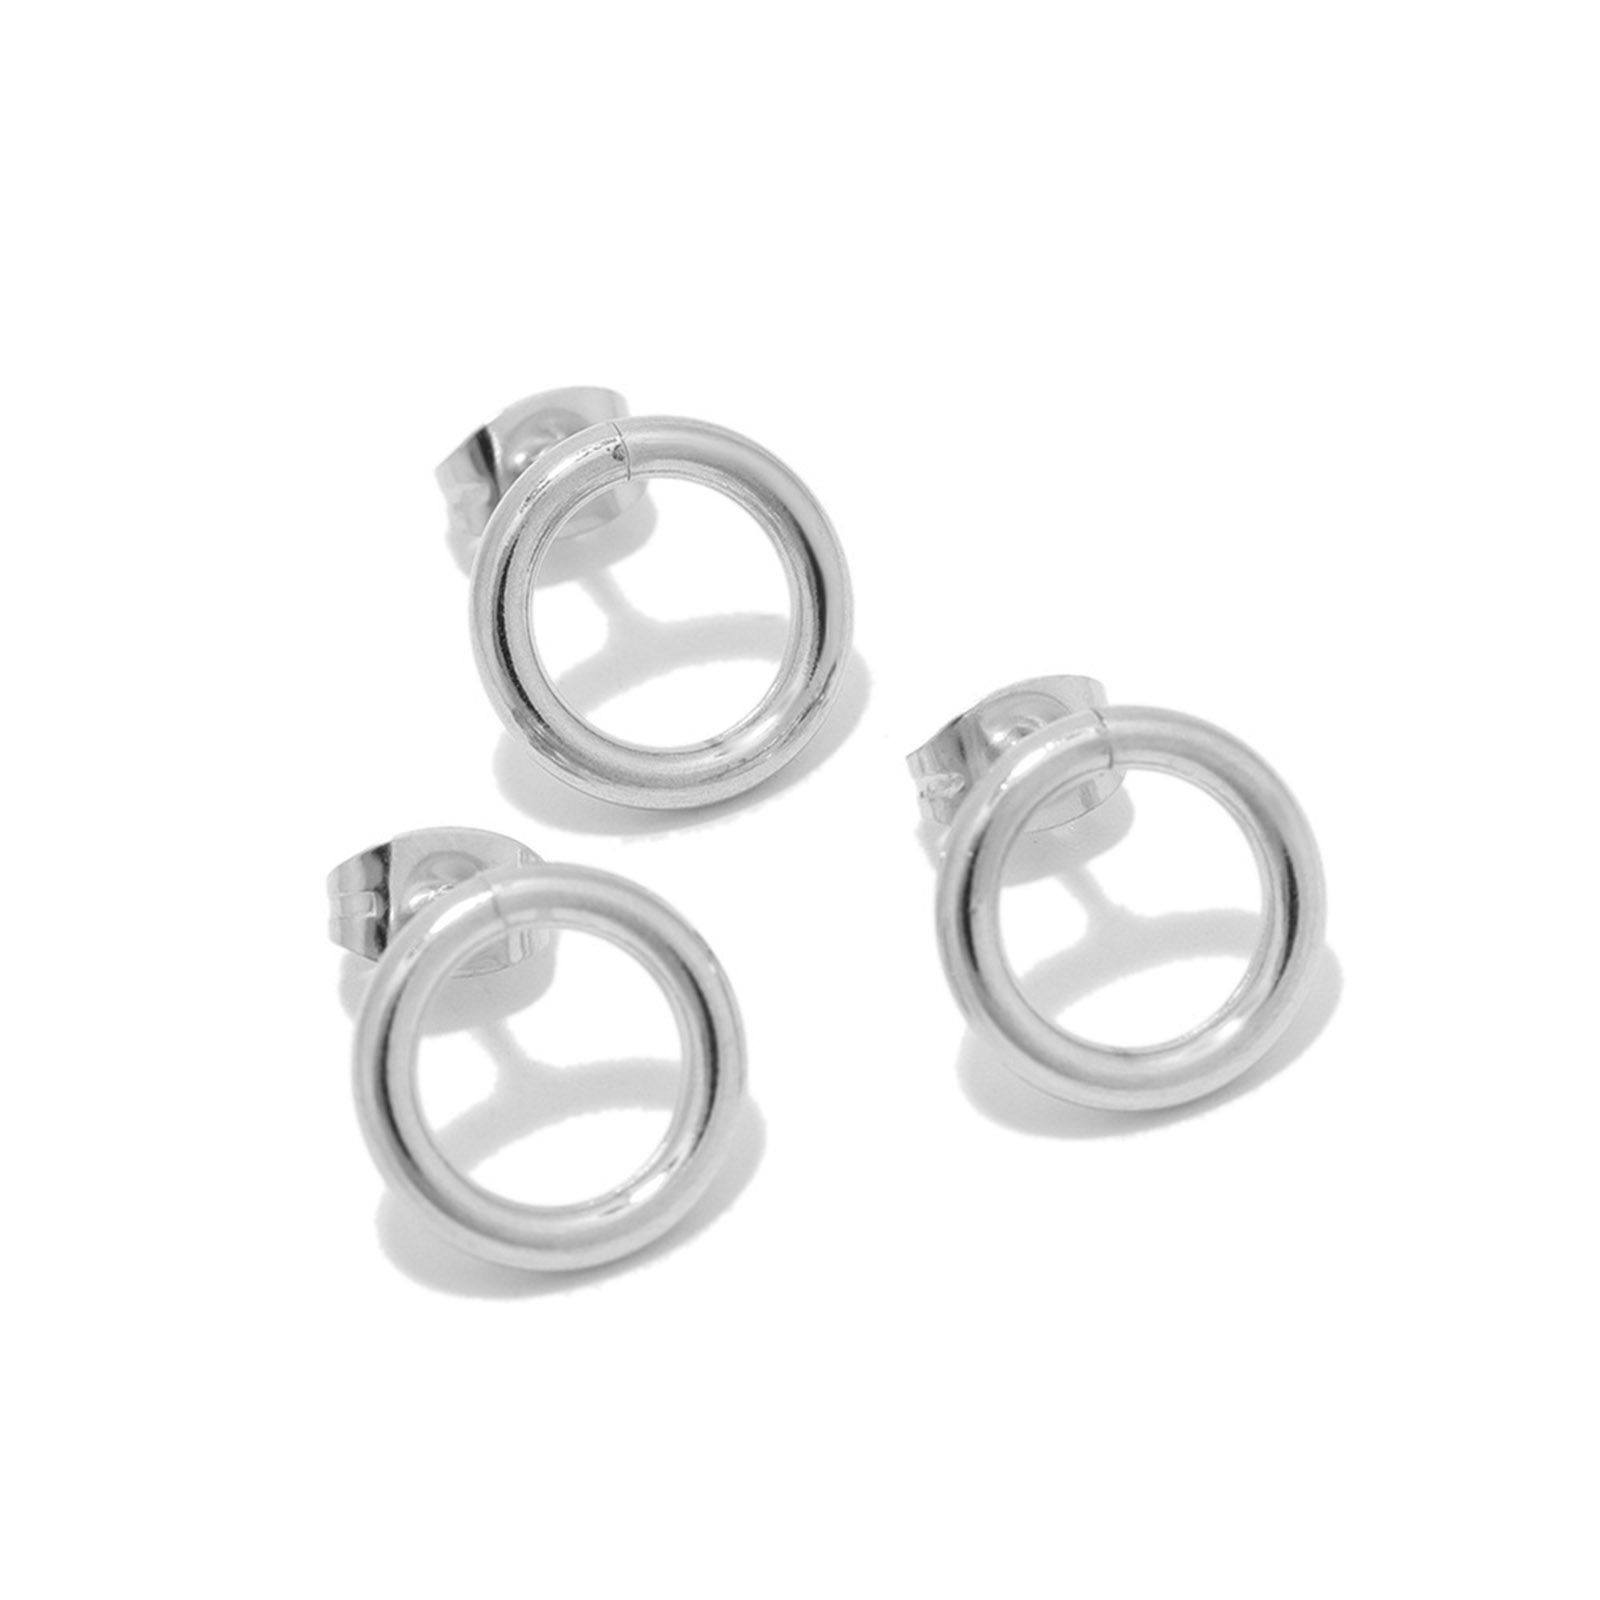 Picture of Stainless Steel Ins Style Ear Post Stud Earrings Circle Ring Silver Tone 14mm Dia., Post/ Wire Size: (20 gauge), 1 Piece